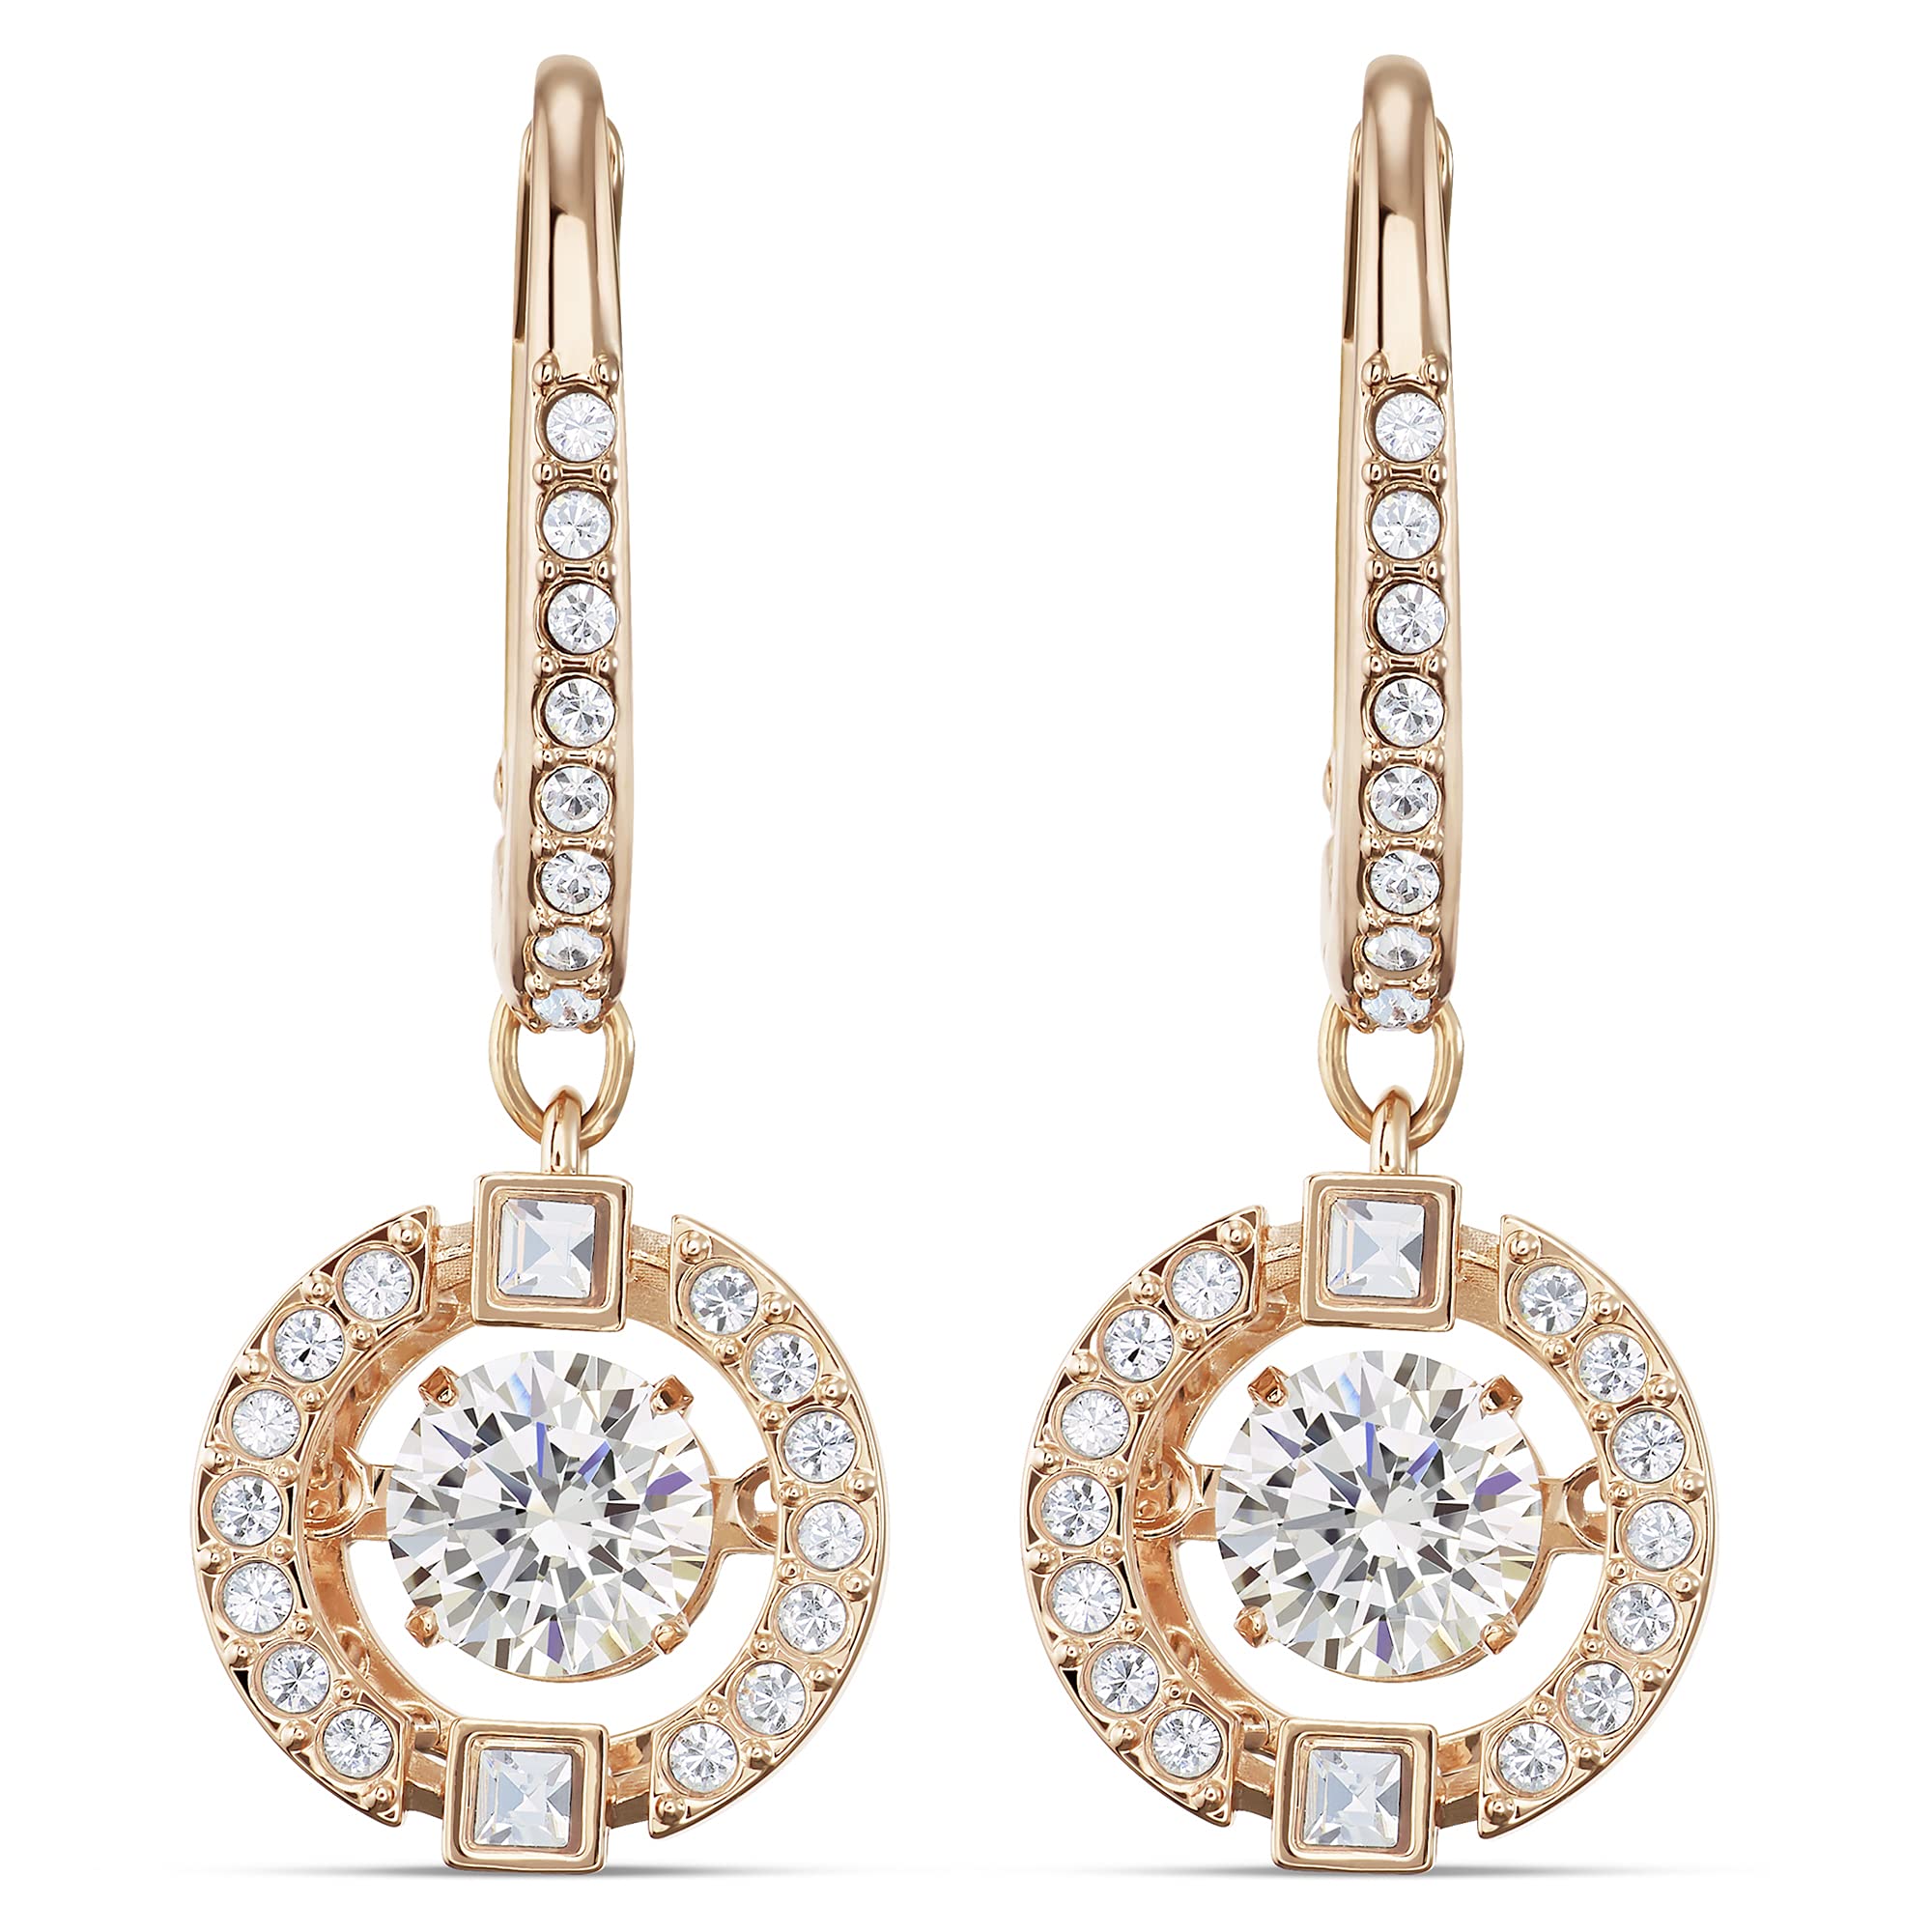 Swarovski Sparking Dance Crystal Jewelry Collection, Gold Tone & Rose Gold Tone Finish